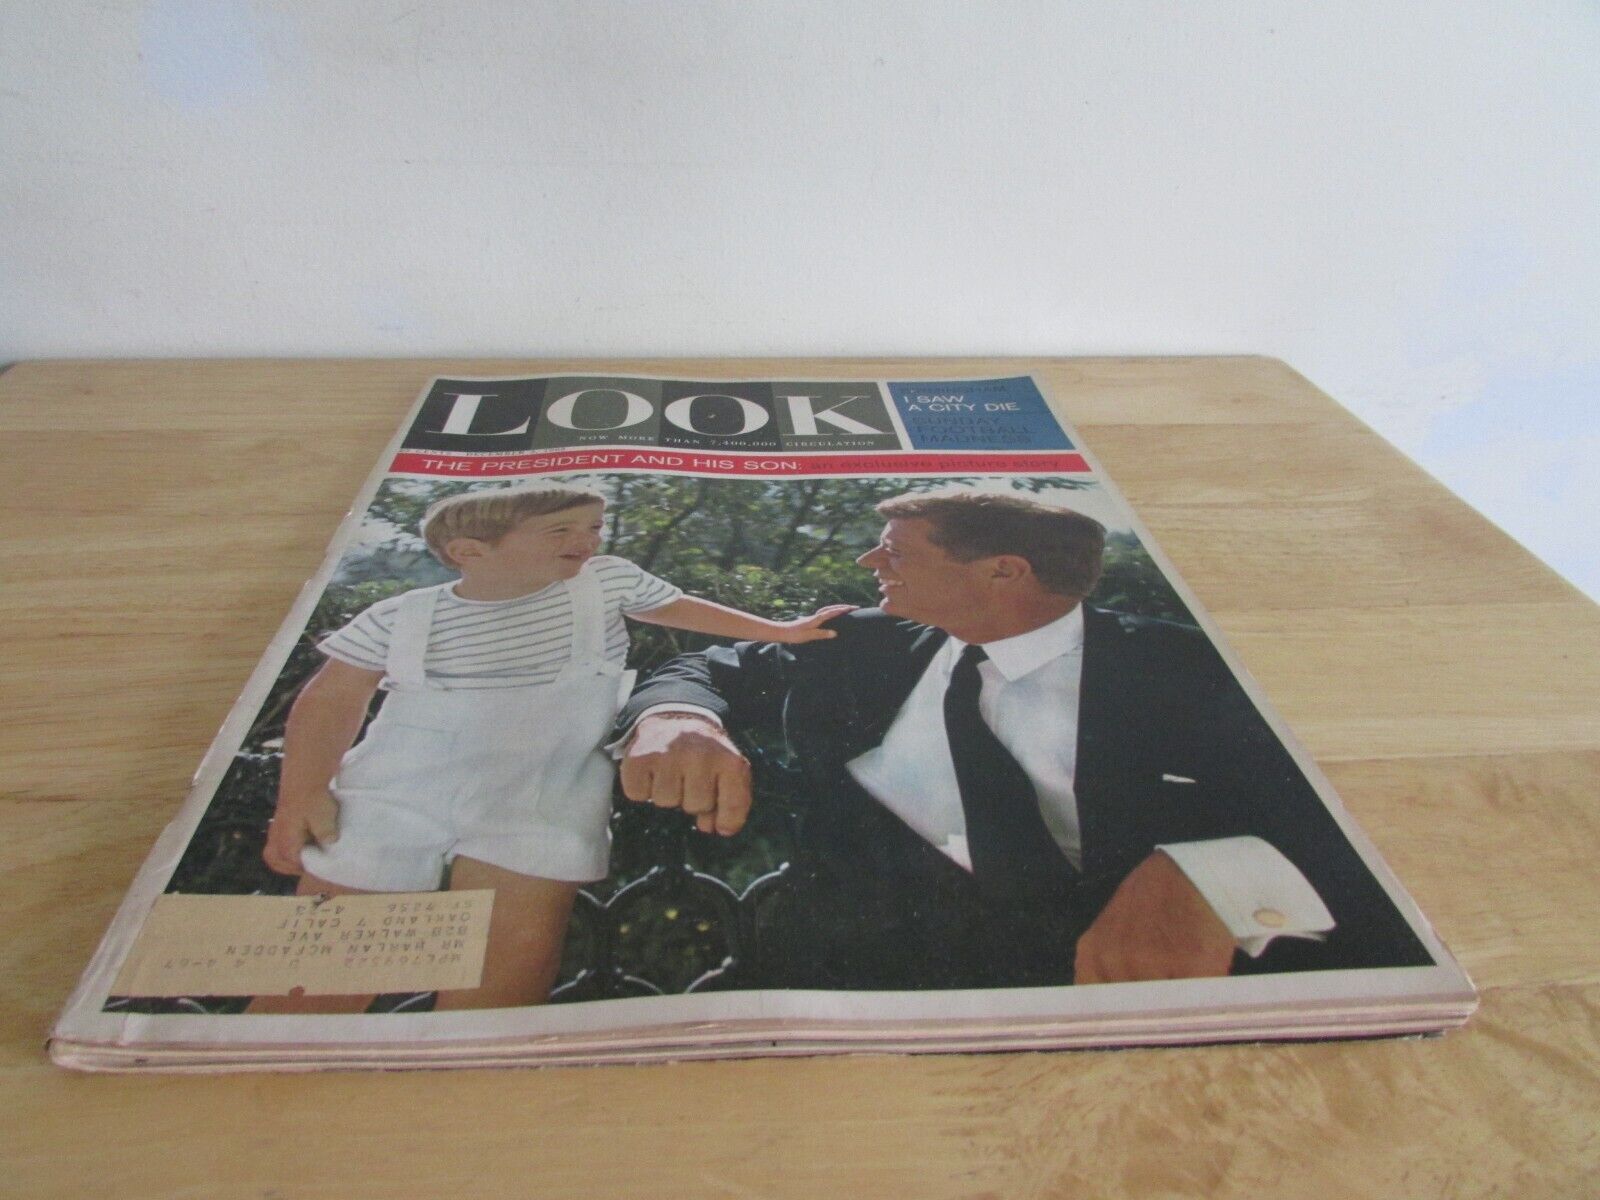 VINTAGE KENNEDY AND HIS FAMILY IN PICTURES BY EDITORS OF LOOK MAGAZINE 1963